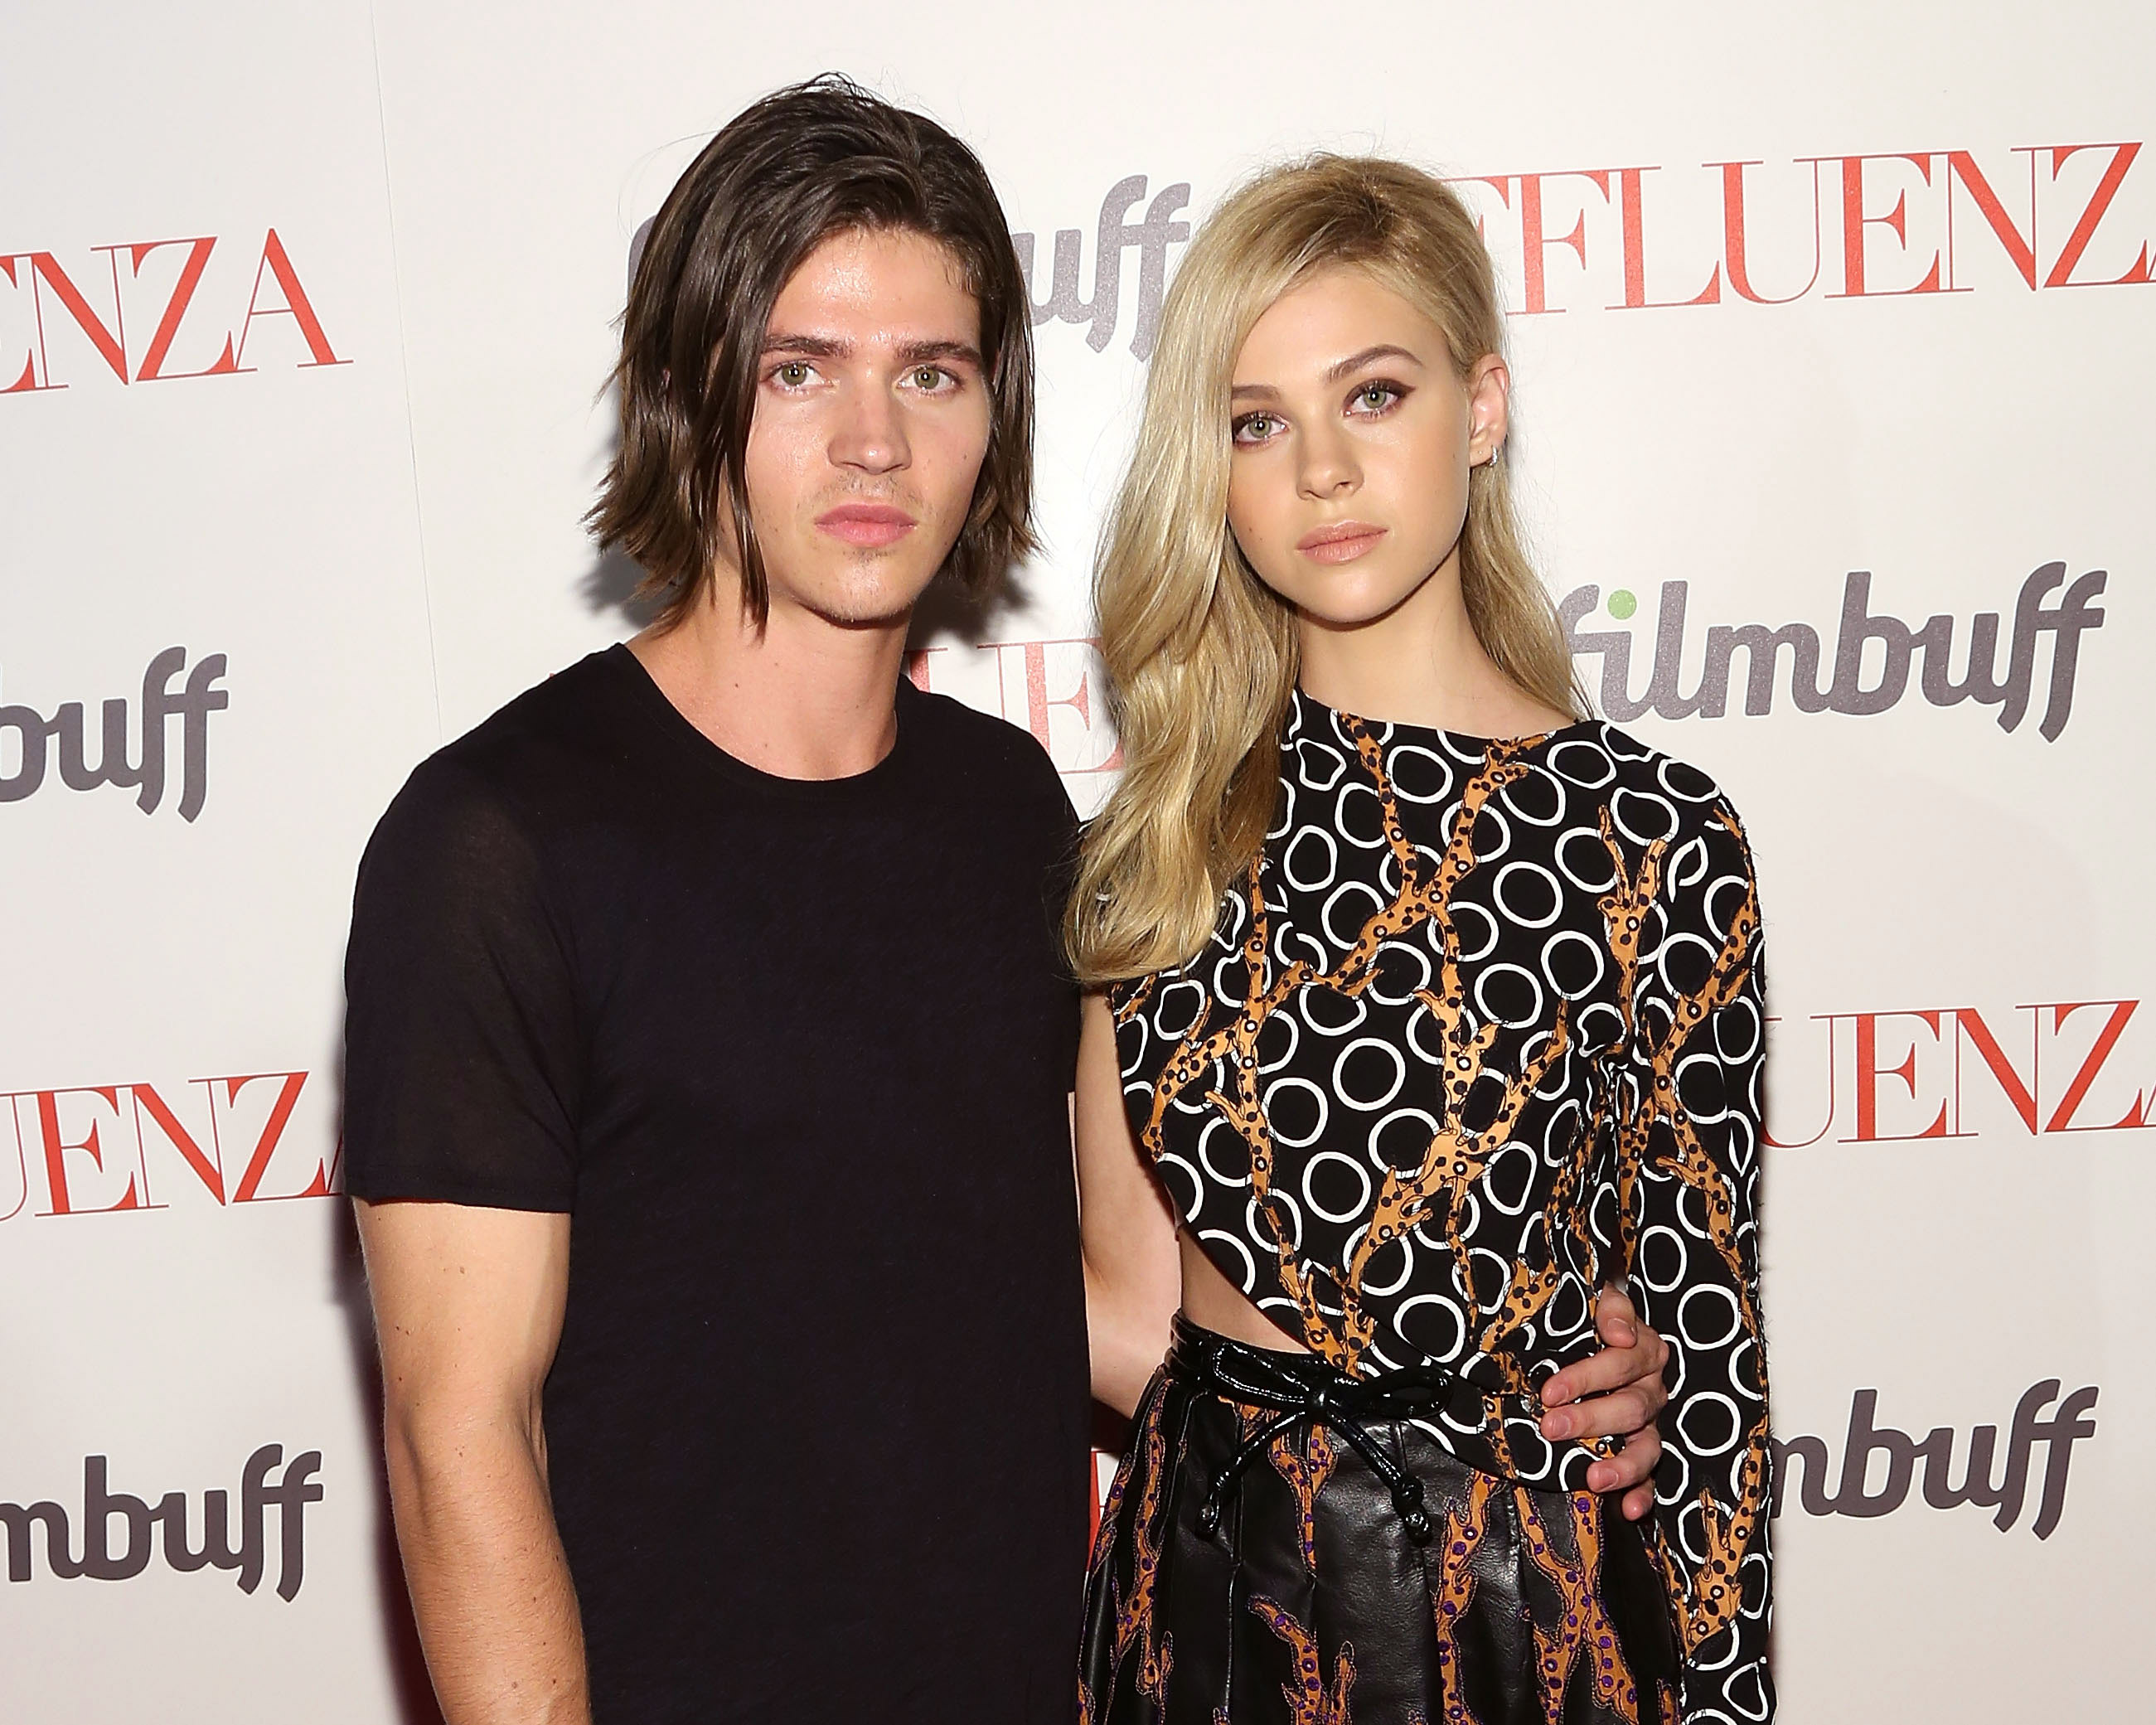 Will Peltz and Nicola Peltz attend the 'Affluenza' premiere at SVA Theater on July 9, 2014 in New York City